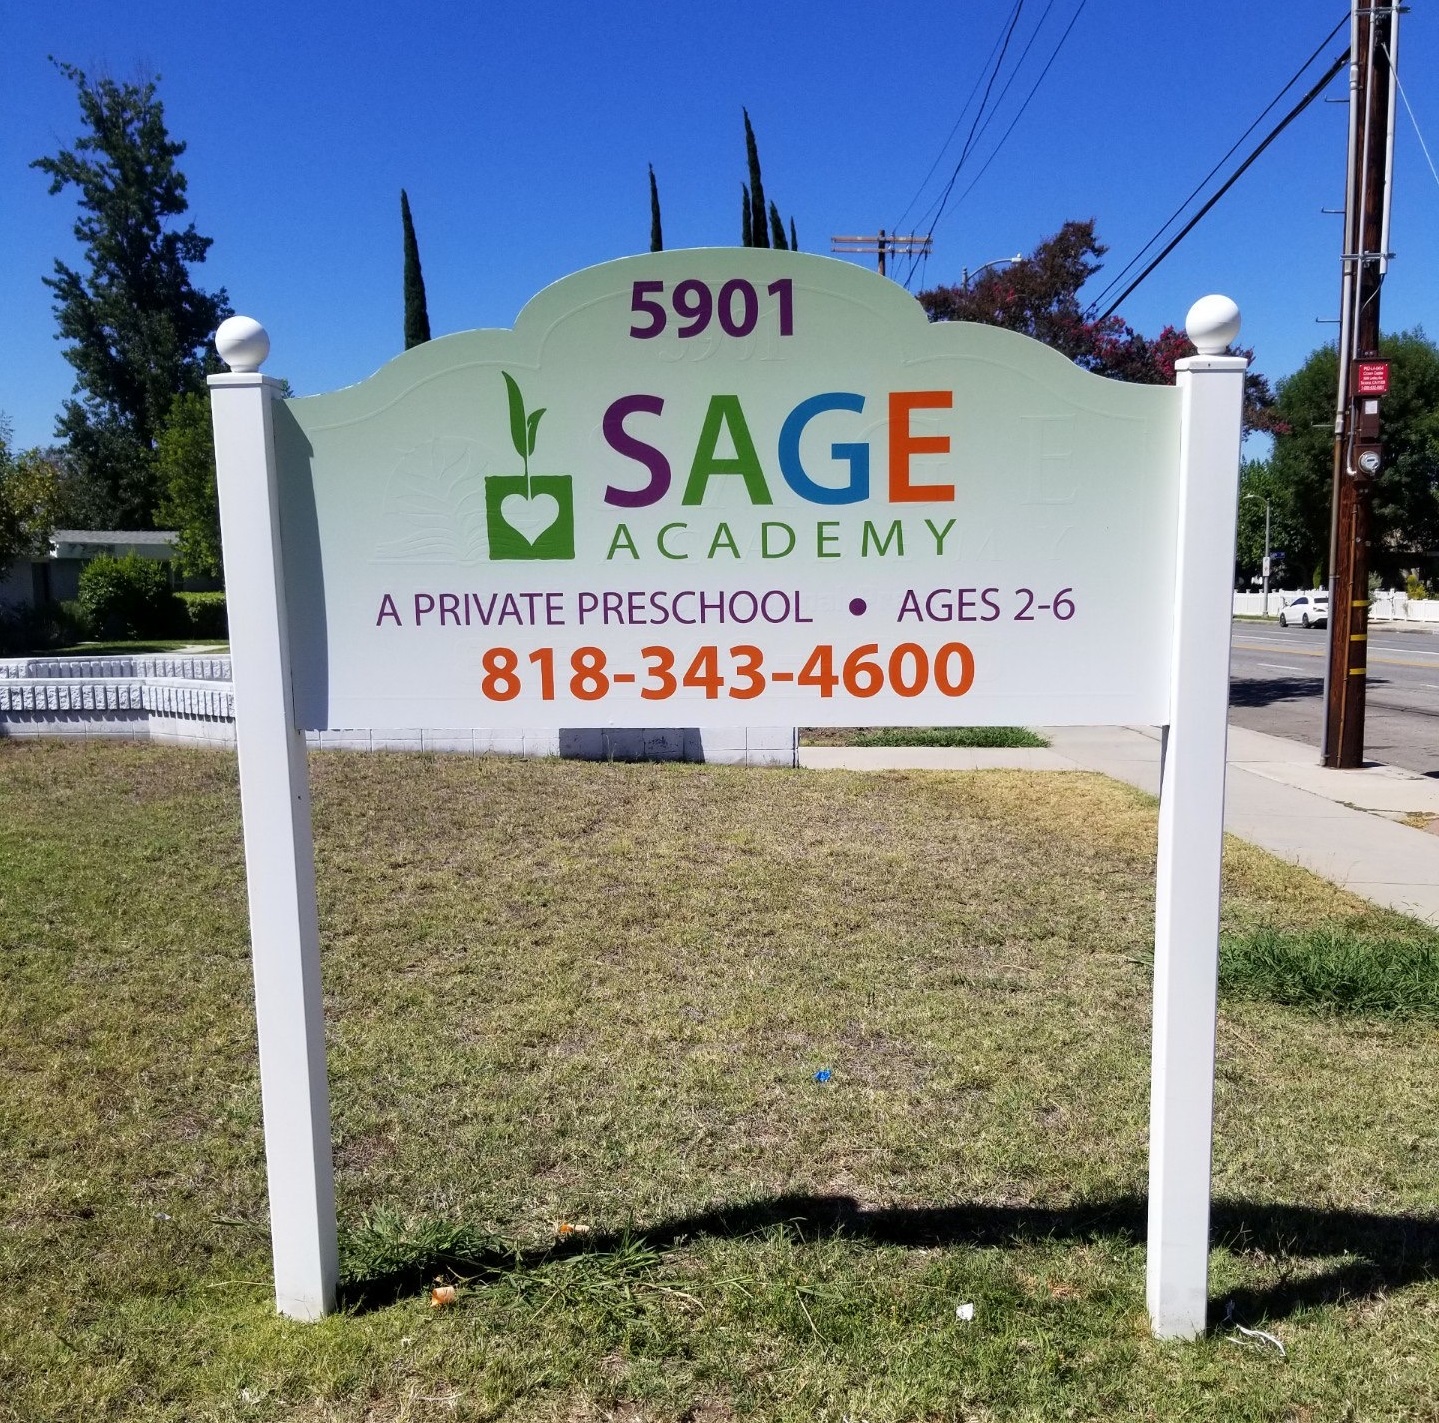 You are currently viewing Streetside Post and Panel Sign for Sage Academy in Tarzana